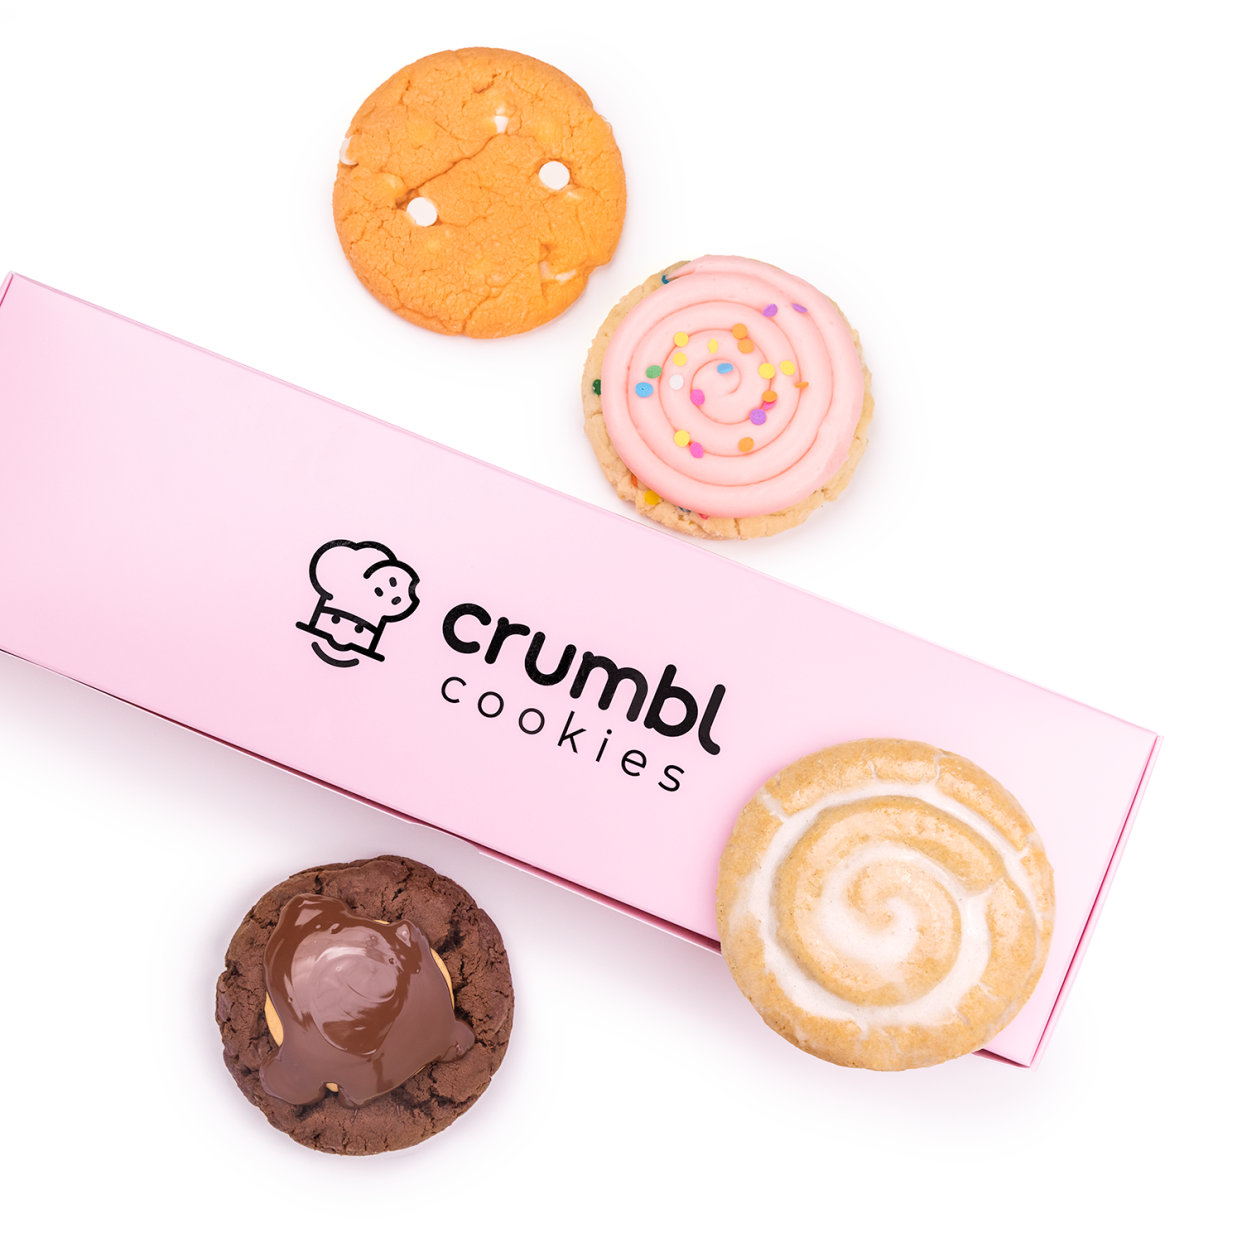 Crumbl Cookies serves up a weekly rotation of specialty cookies.